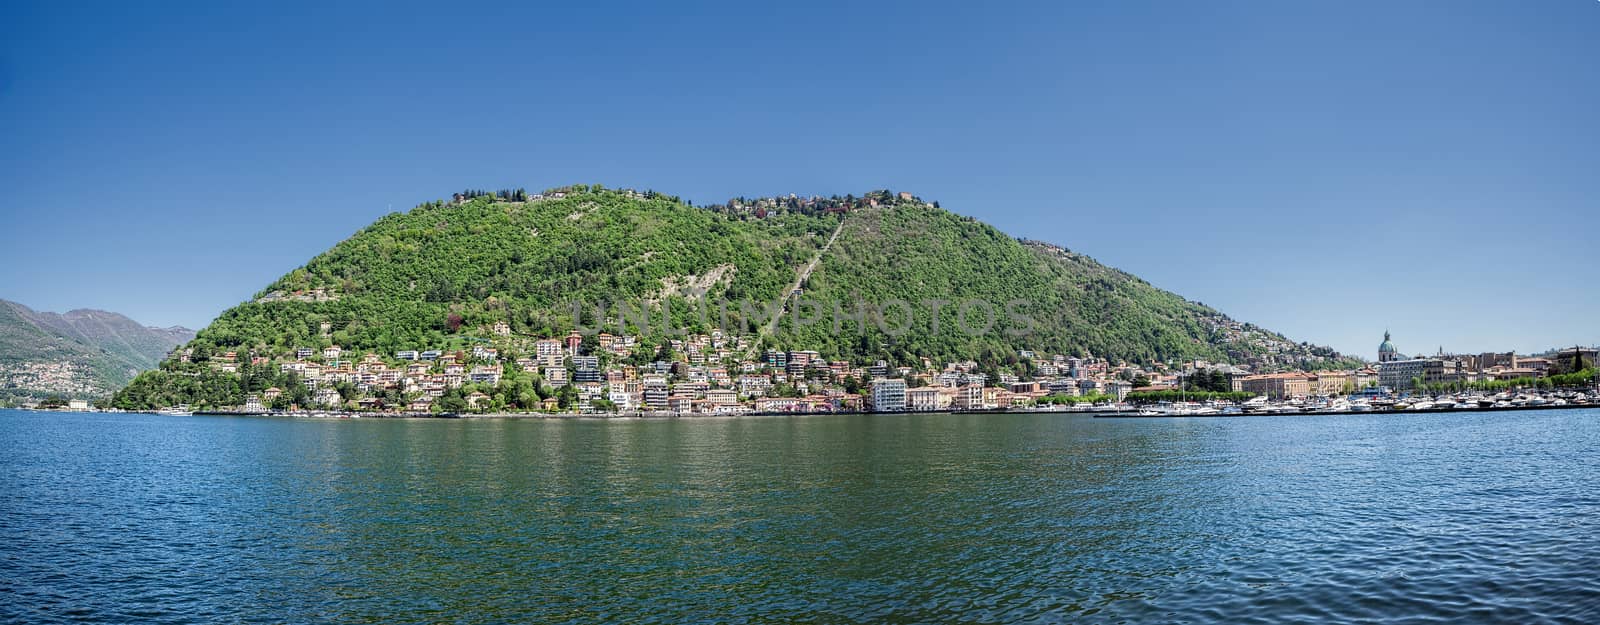 Como is a city and comune in Lombardy, Italy.